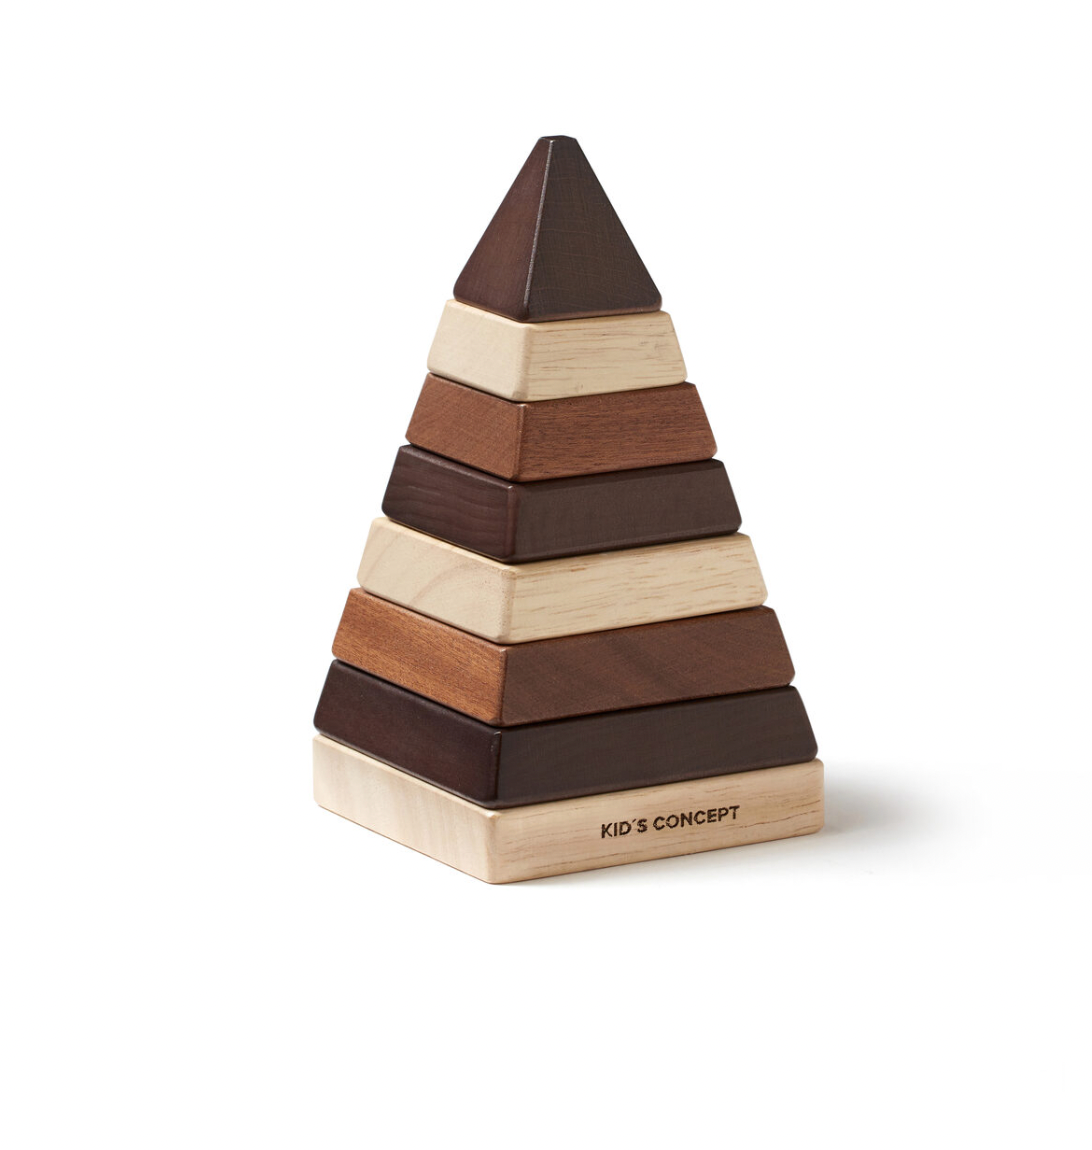 Kids Concept Insta Sale Stacking Pyramid Neo